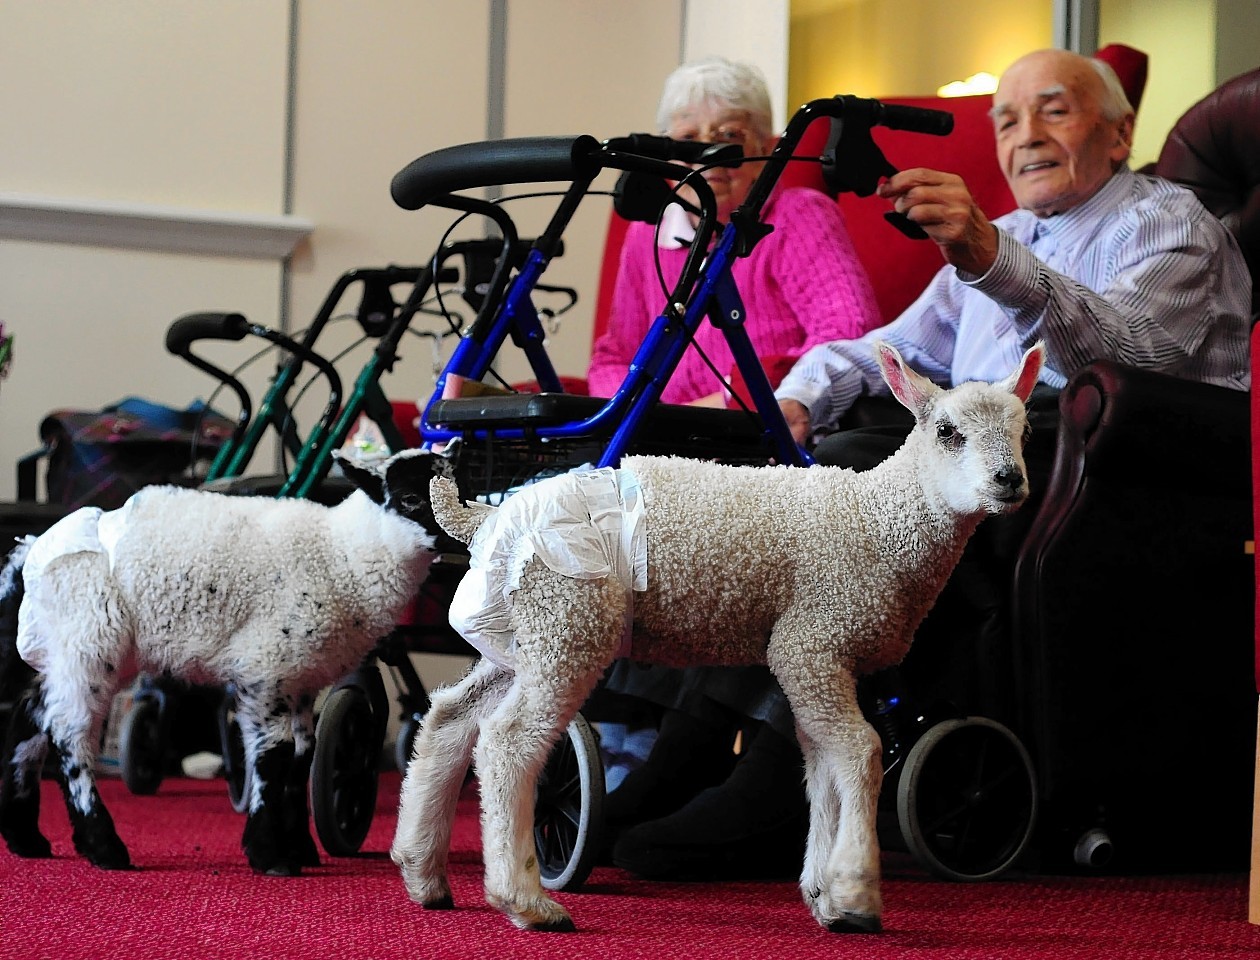 Newborn lambs Poppy and Lamby moved into the care home